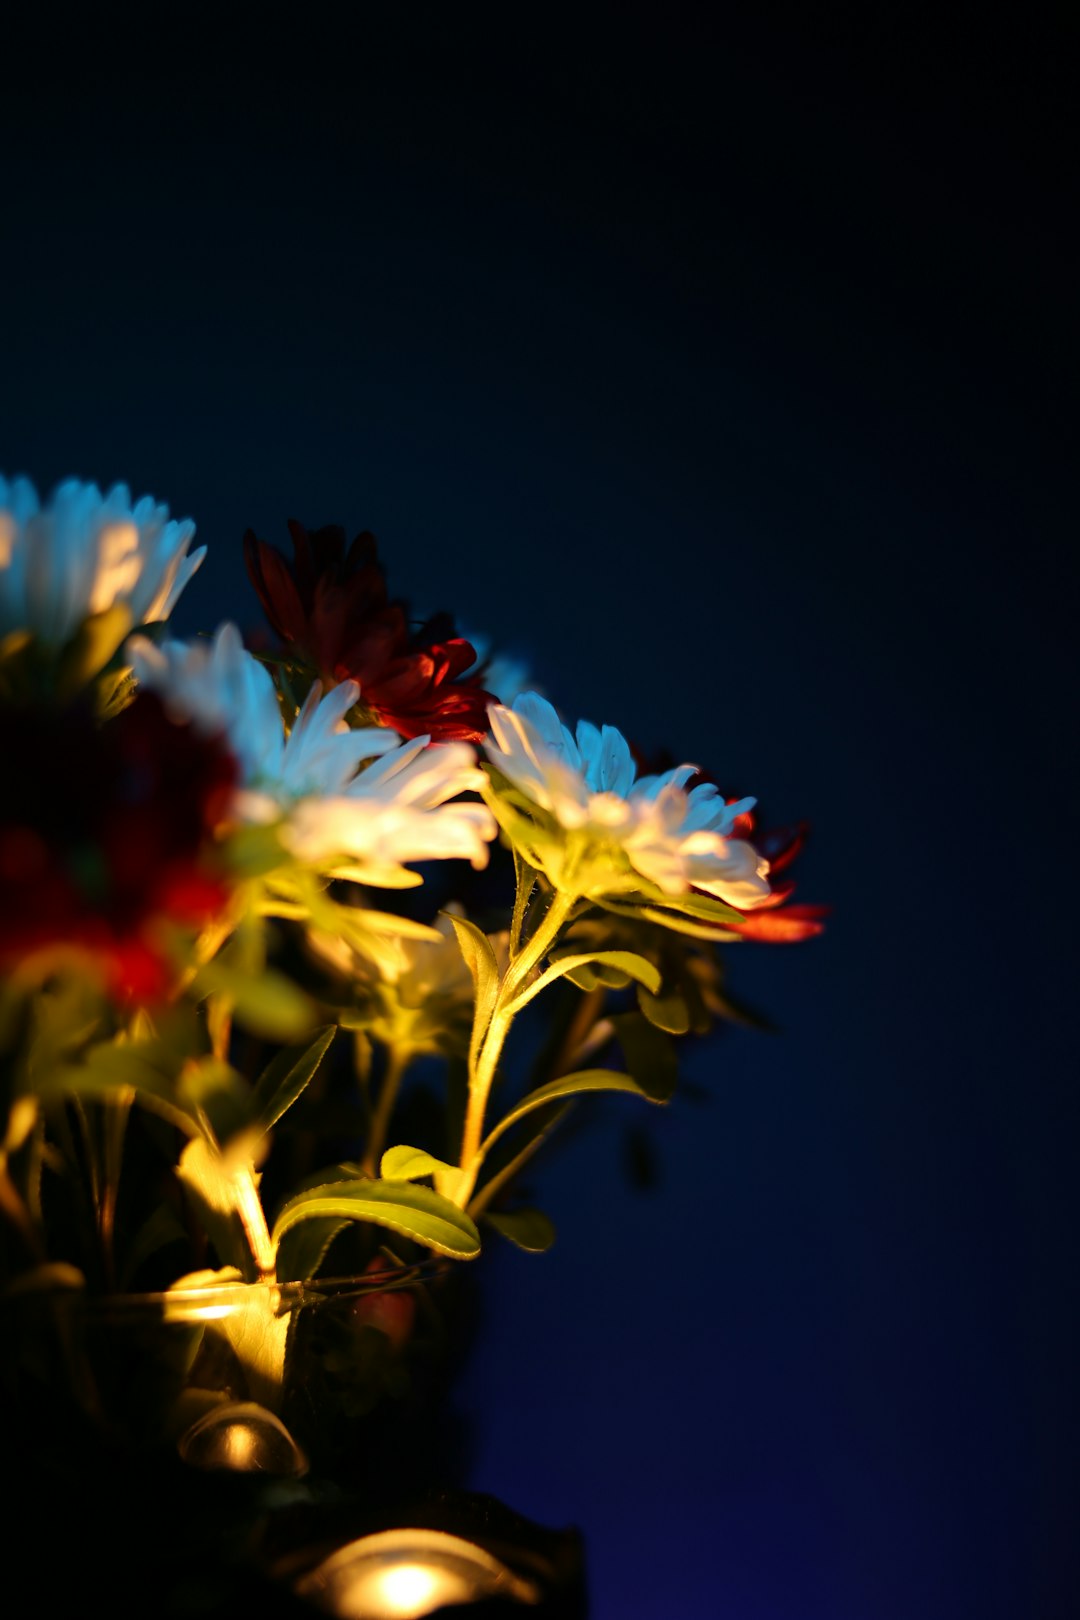 yellow and red flower in black background